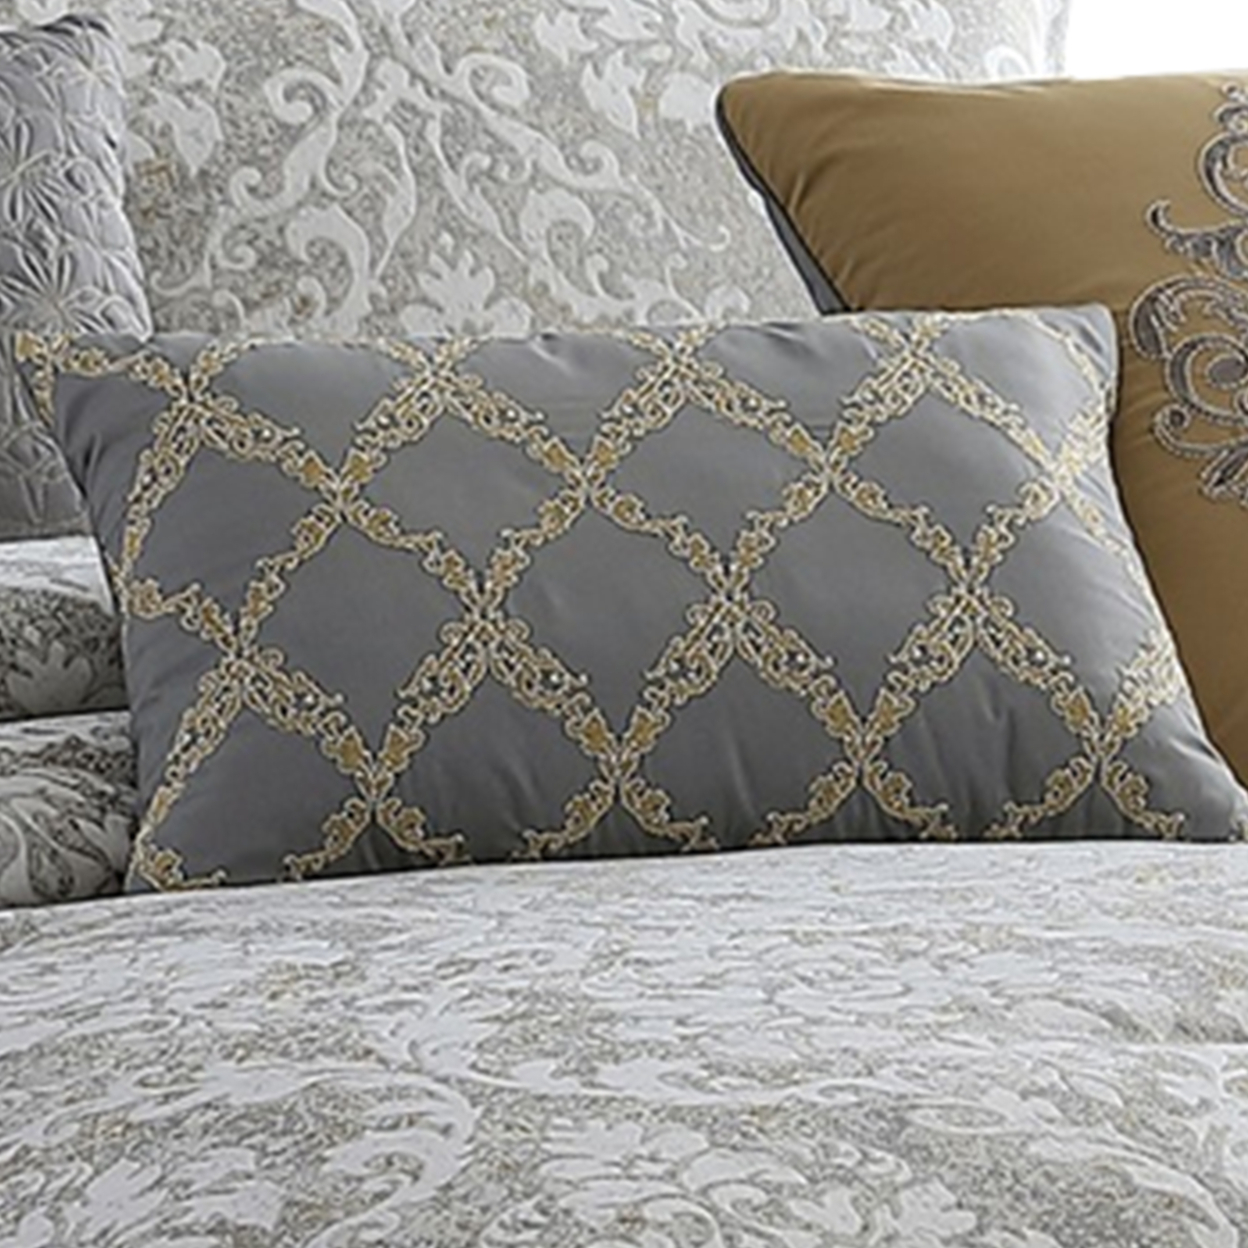 8 Piece Queen Polyester Comforter Set With Medallion Print, Gray And Gold- Saltoro Sherpi